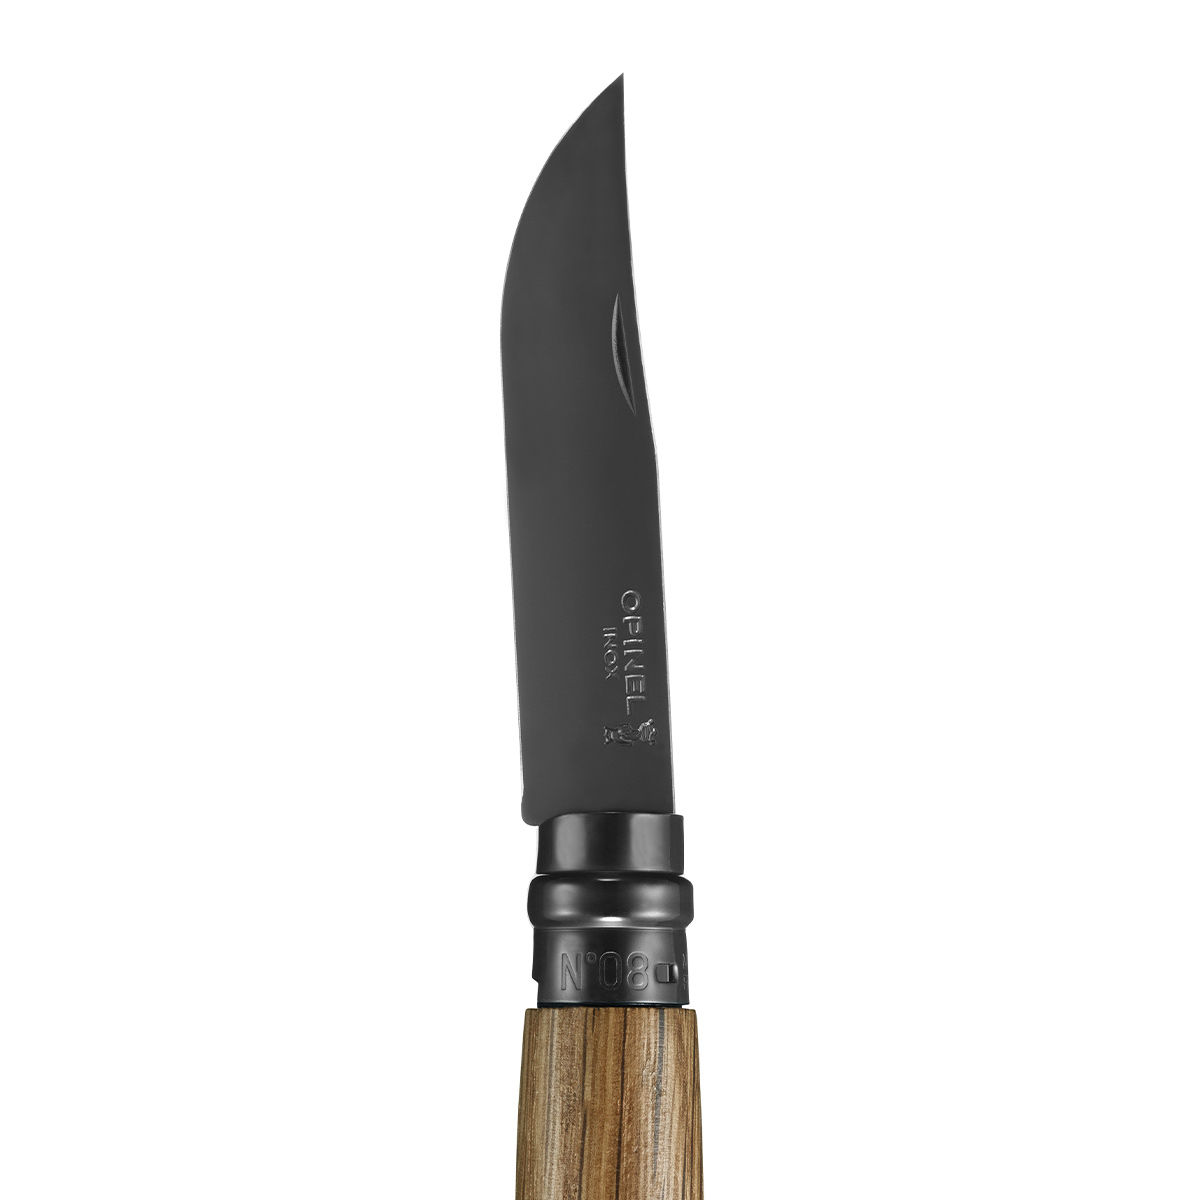 Couteau Opinel N°8 lame noire